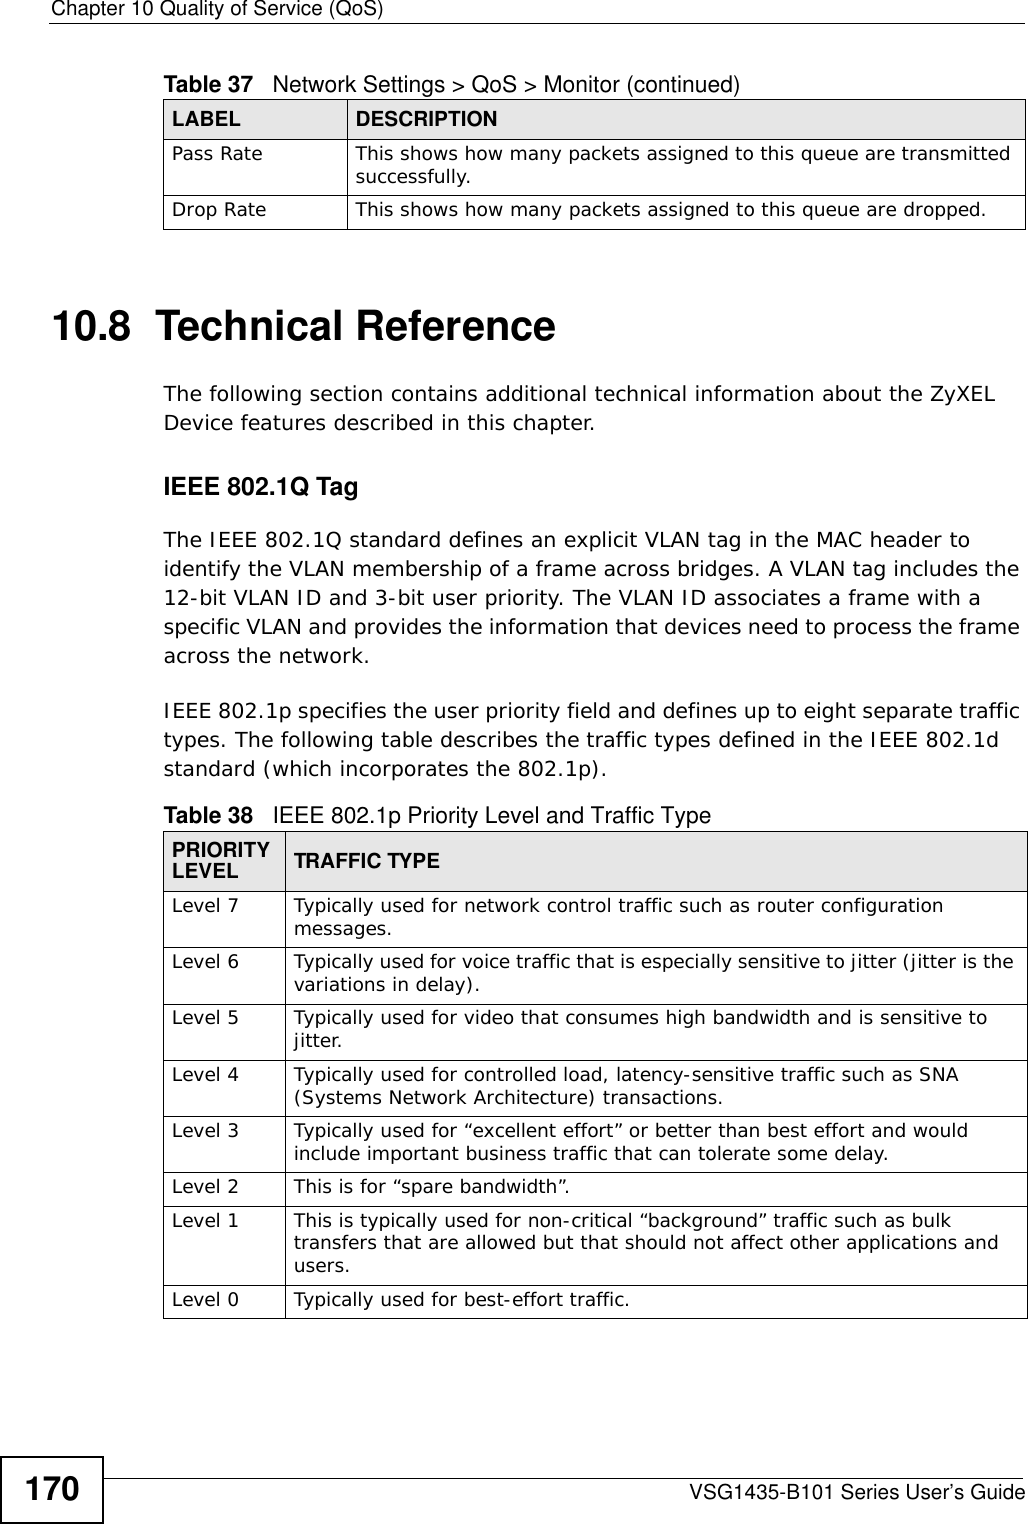 Chapter 10 Quality of Service (QoS)VSG1435-B101 Series User’s Guide17010.8  Technical ReferenceThe following section contains additional technical information about the ZyXEL Device features described in this chapter.IEEE 802.1Q TagThe IEEE 802.1Q standard defines an explicit VLAN tag in the MAC header to identify the VLAN membership of a frame across bridges. A VLAN tag includes the 12-bit VLAN ID and 3-bit user priority. The VLAN ID associates a frame with a specific VLAN and provides the information that devices need to process the frame across the network. IEEE 802.1p specifies the user priority field and defines up to eight separate traffic types. The following table describes the traffic types defined in the IEEE 802.1d standard (which incorporates the 802.1p).  Pass Rate This shows how many packets assigned to this queue are transmitted successfully.Drop Rate This shows how many packets assigned to this queue are dropped.Table 37   Network Settings &gt; QoS &gt; Monitor (continued)LABEL DESCRIPTIONTable 38   IEEE 802.1p Priority Level and Traffic TypePRIORITY  LEVEL TRAFFIC TYPELevel 7 Typically used for network control traffic such as router configuration messages.Level 6 Typically used for voice traffic that is especially sensitive to jitter (jitter is the variations in delay).Level 5 Typically used for video that consumes high bandwidth and is sensitive to jitter.Level 4 Typically used for controlled load, latency-sensitive traffic such as SNA (Systems Network Architecture) transactions.Level 3 Typically used for “excellent effort” or better than best effort and would include important business traffic that can tolerate some delay.Level 2 This is for “spare bandwidth”. Level 1 This is typically used for non-critical “background” traffic such as bulk transfers that are allowed but that should not affect other applications and users. Level 0 Typically used for best-effort traffic.